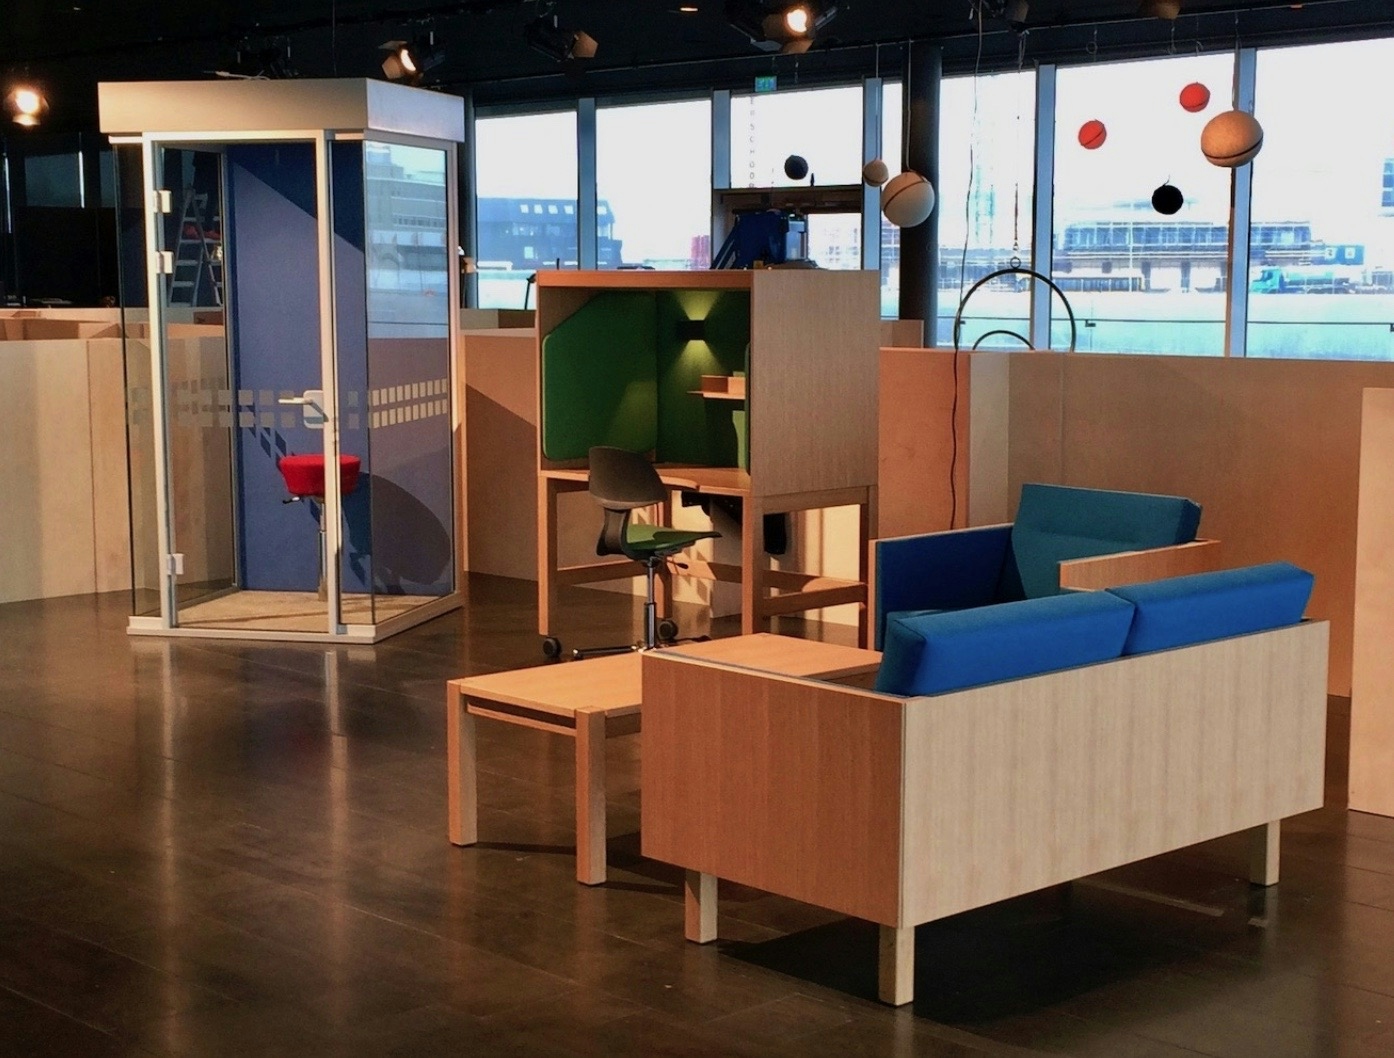 Axis Furniture stand at DesignMarch 2017. Callbox Símon, workstation Box Office and sofa suite Sófus with complimentary table